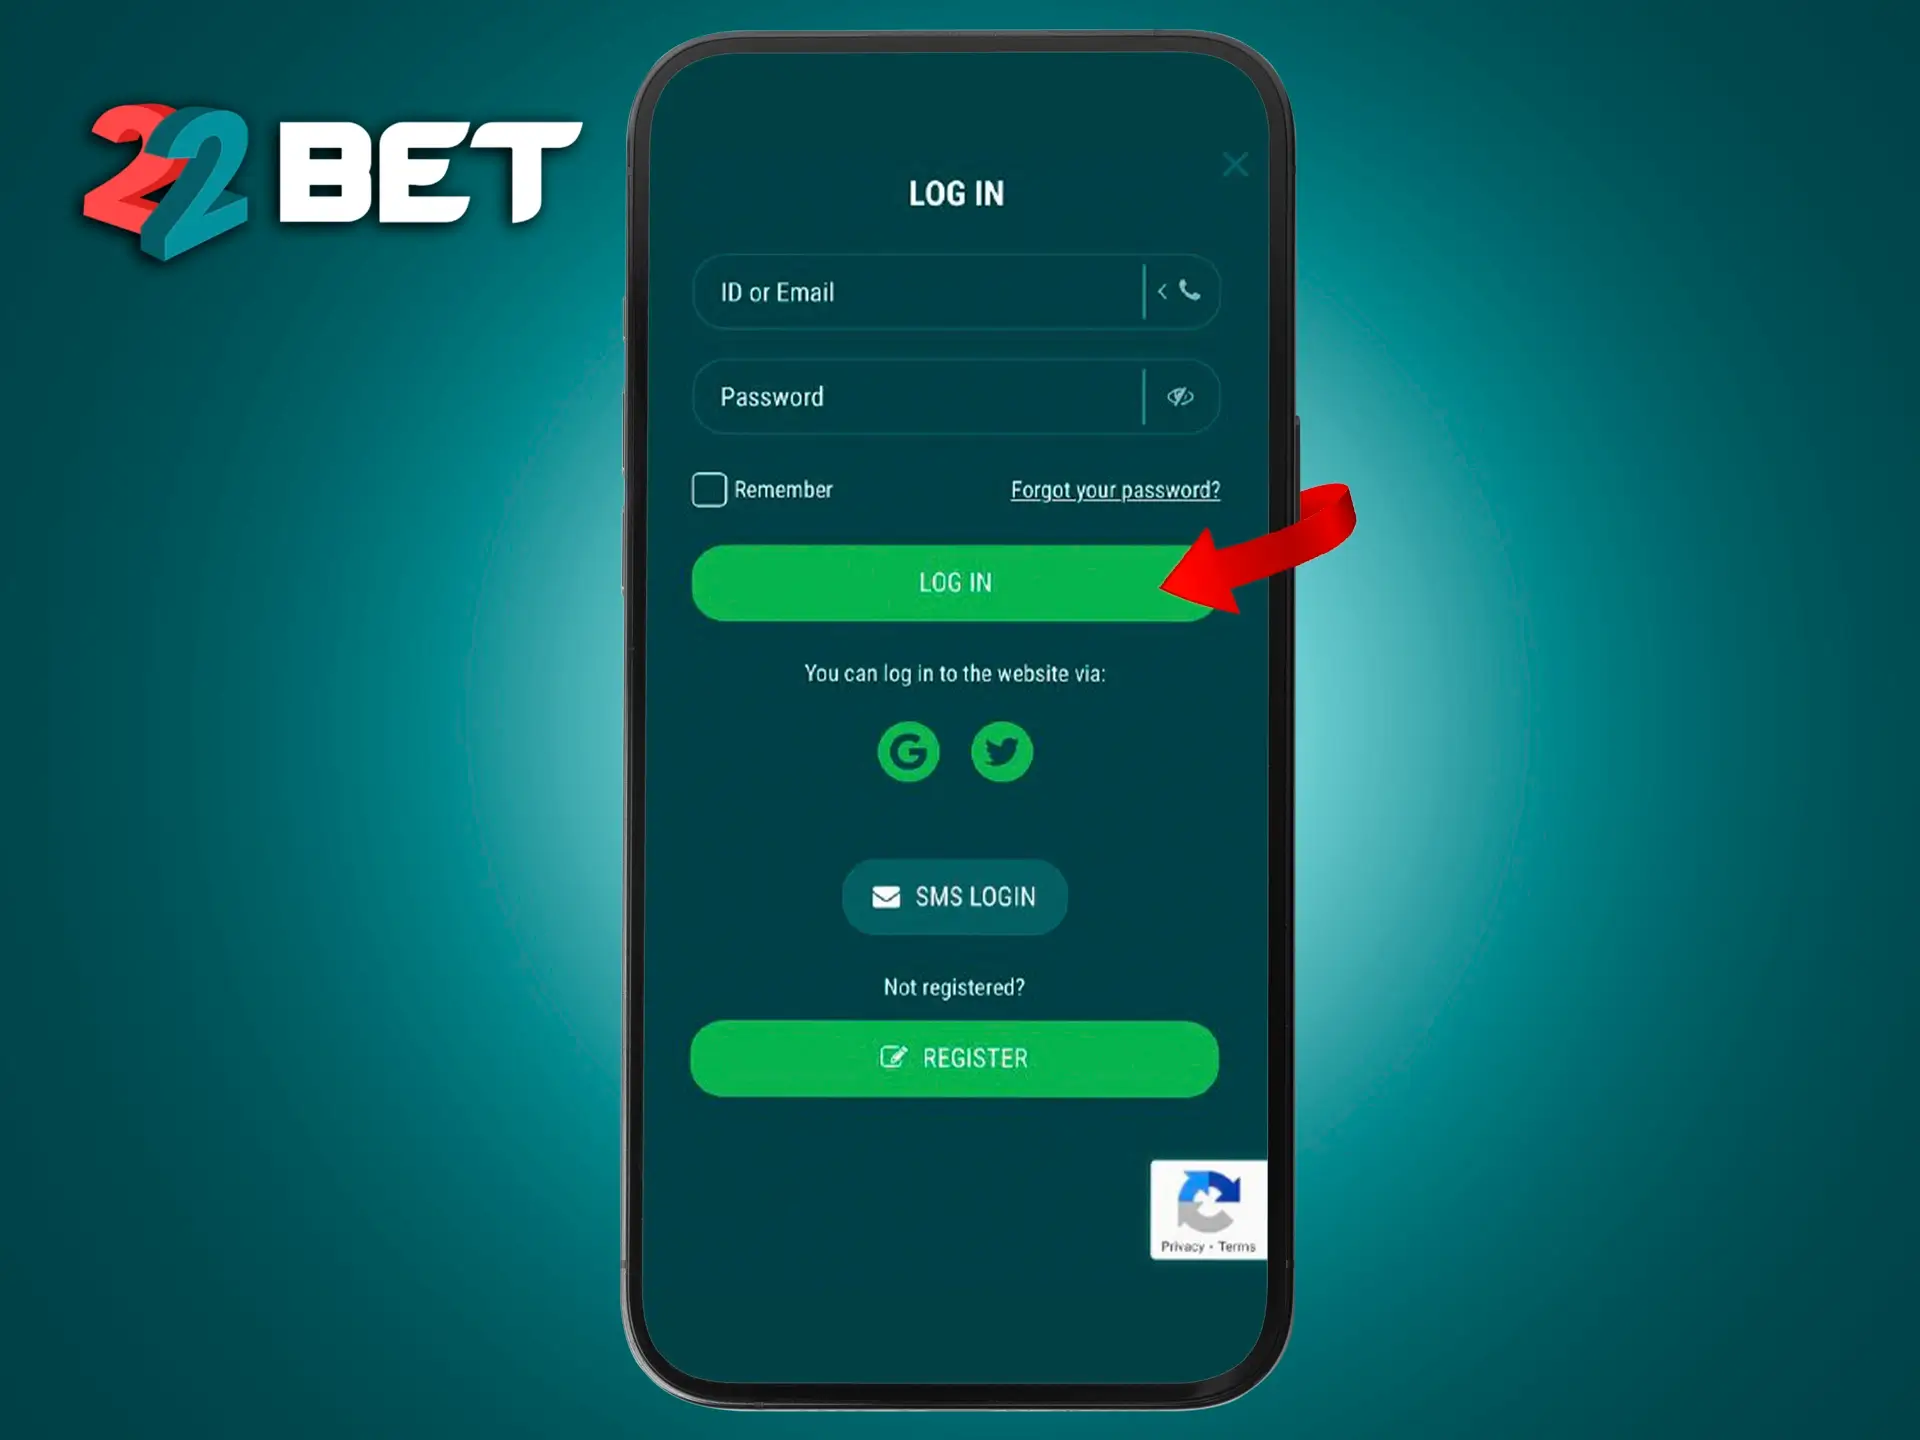 Fill in your details to log in to your 22Bet Casino account.